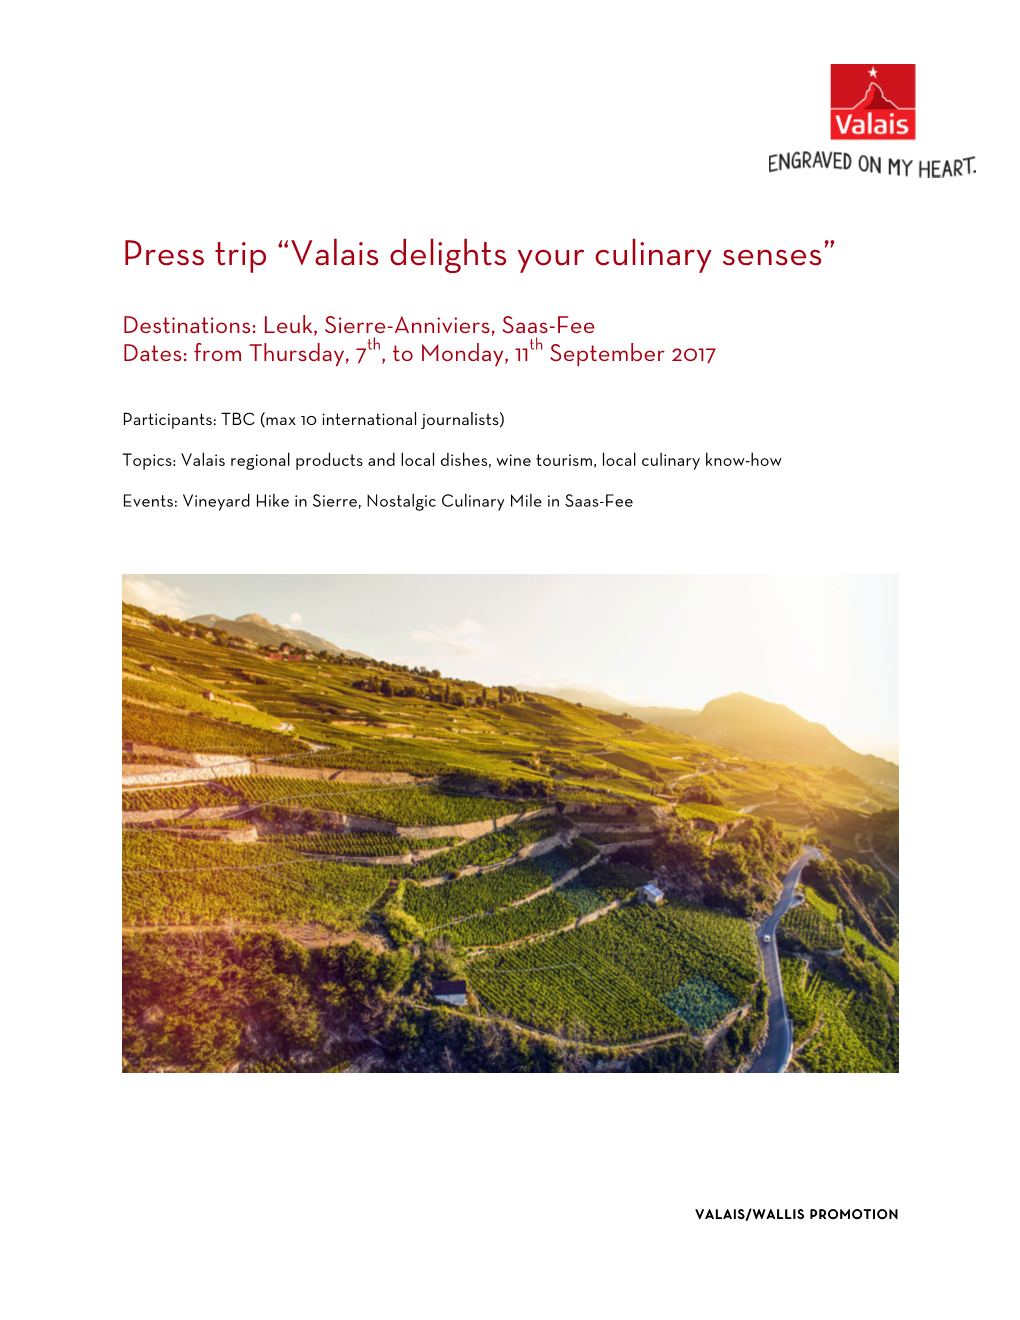 Valais Delights Your Culinary Senses”